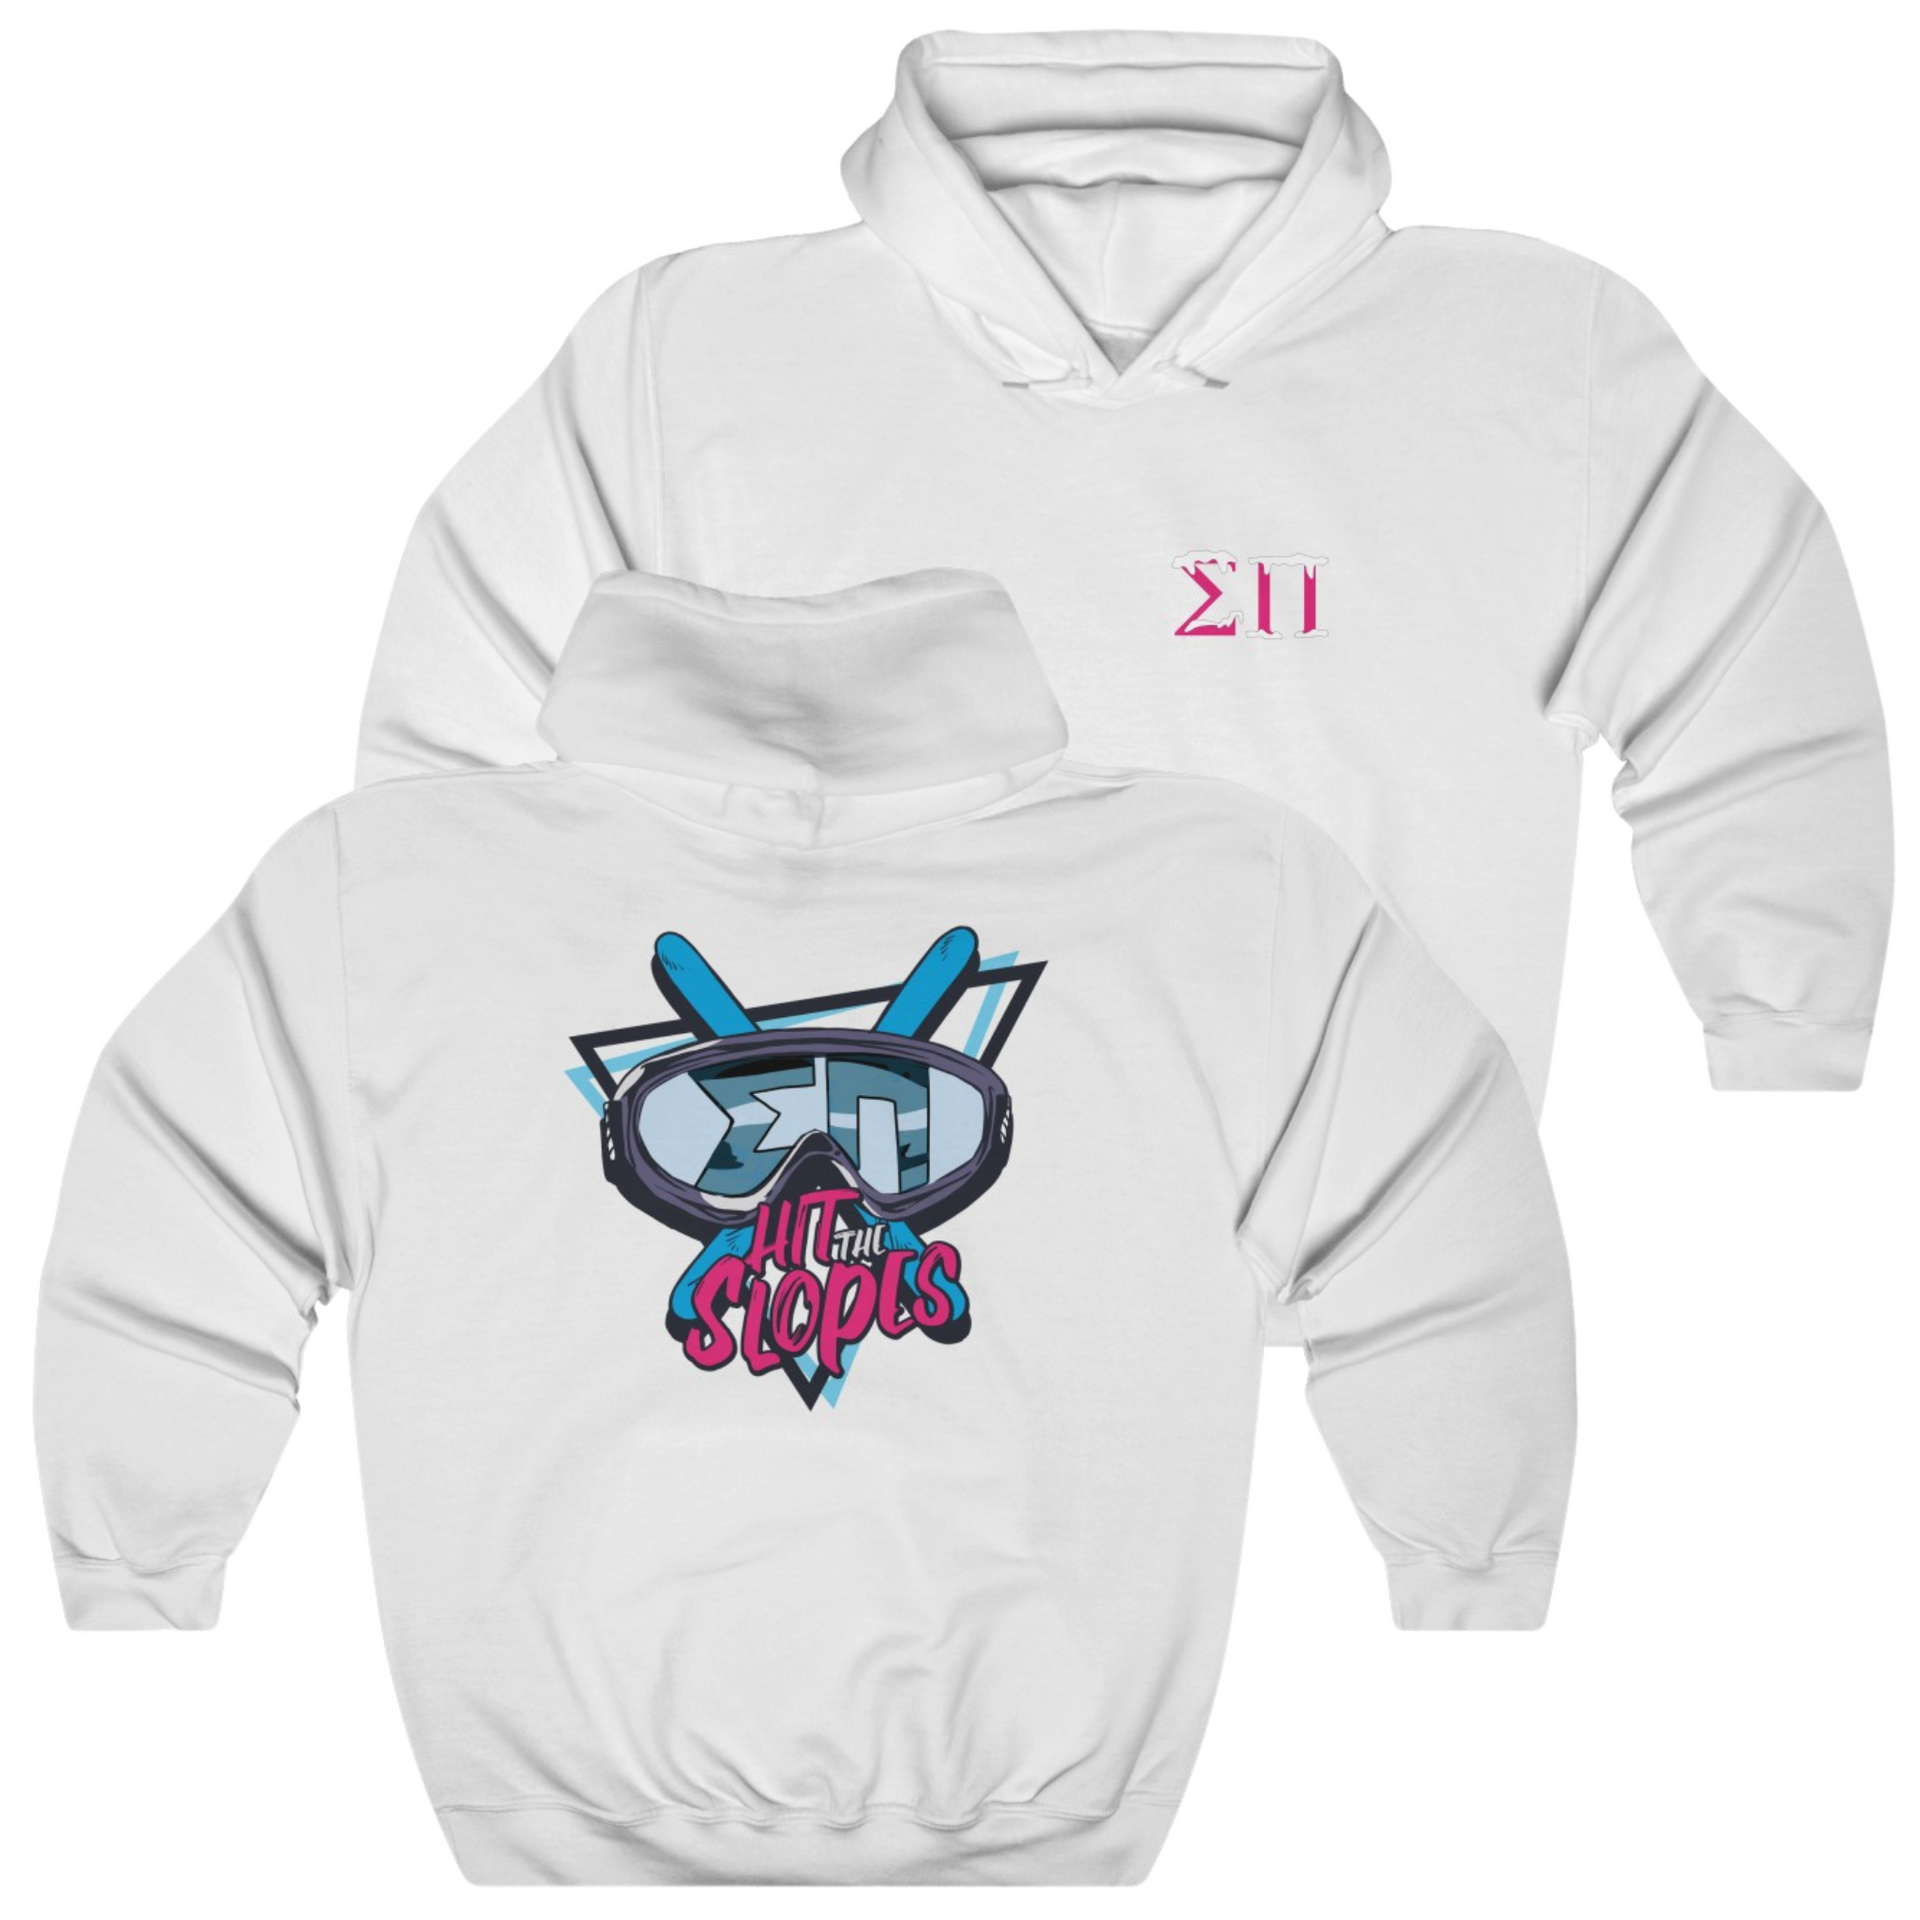 White Sigma Pi Graphic Hoodie | Hit the Slopes | Sigma Pi Apparel and Merchandise 